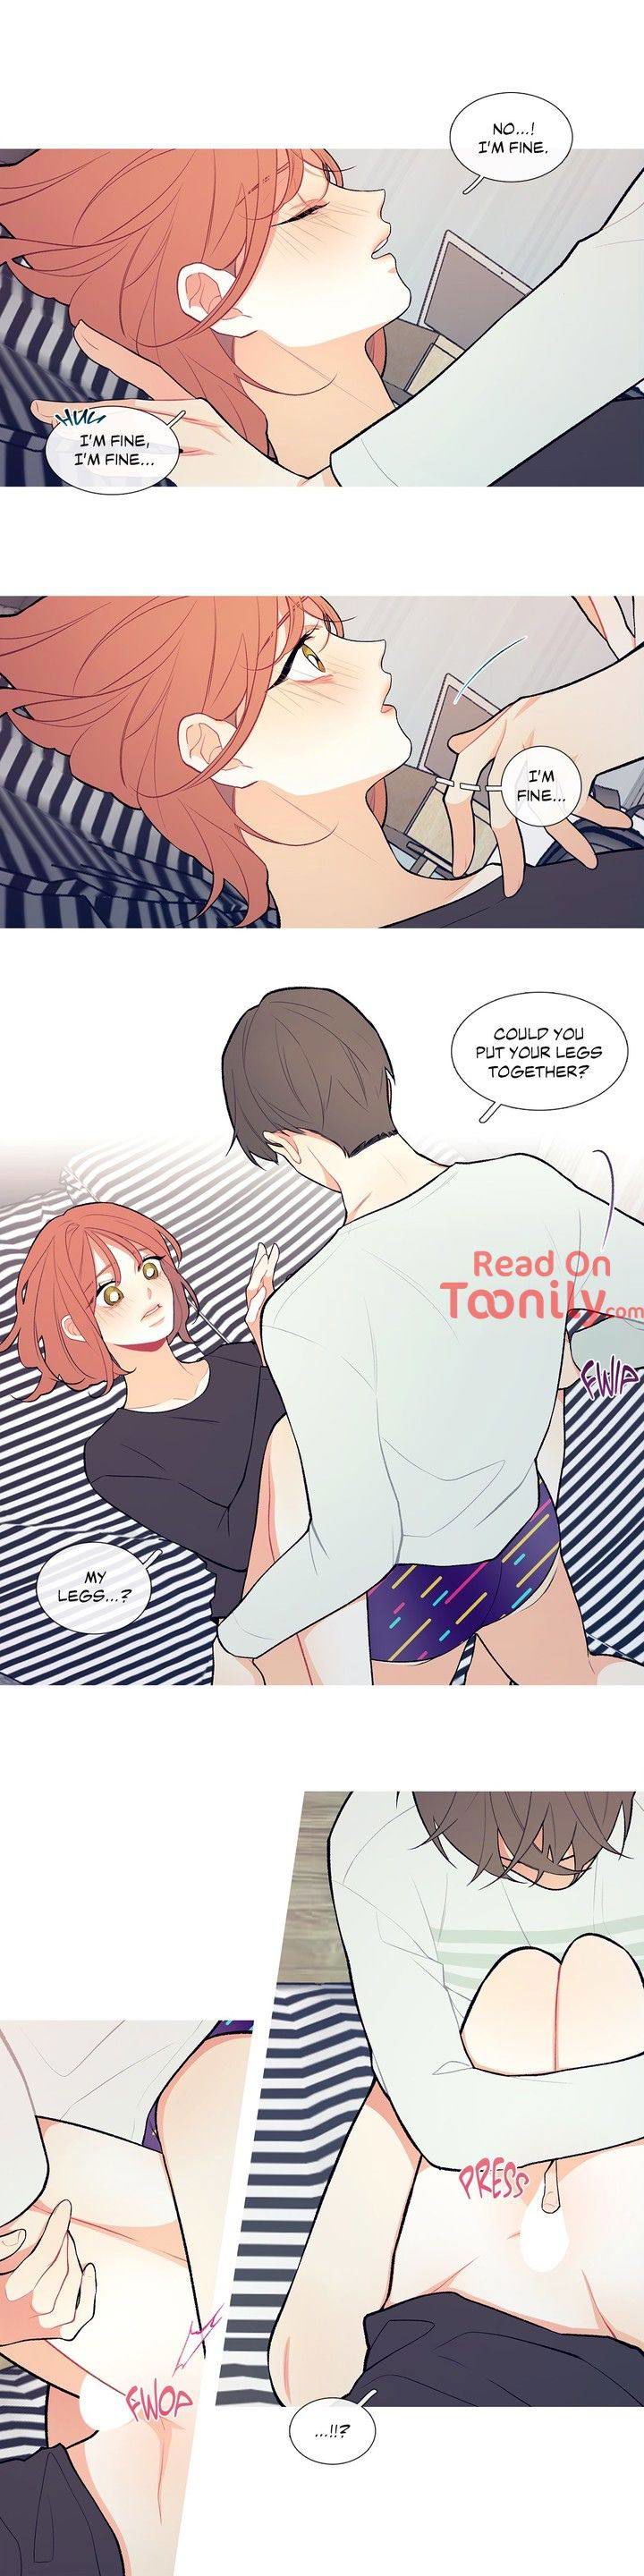 whats-going-on-chap-4-12